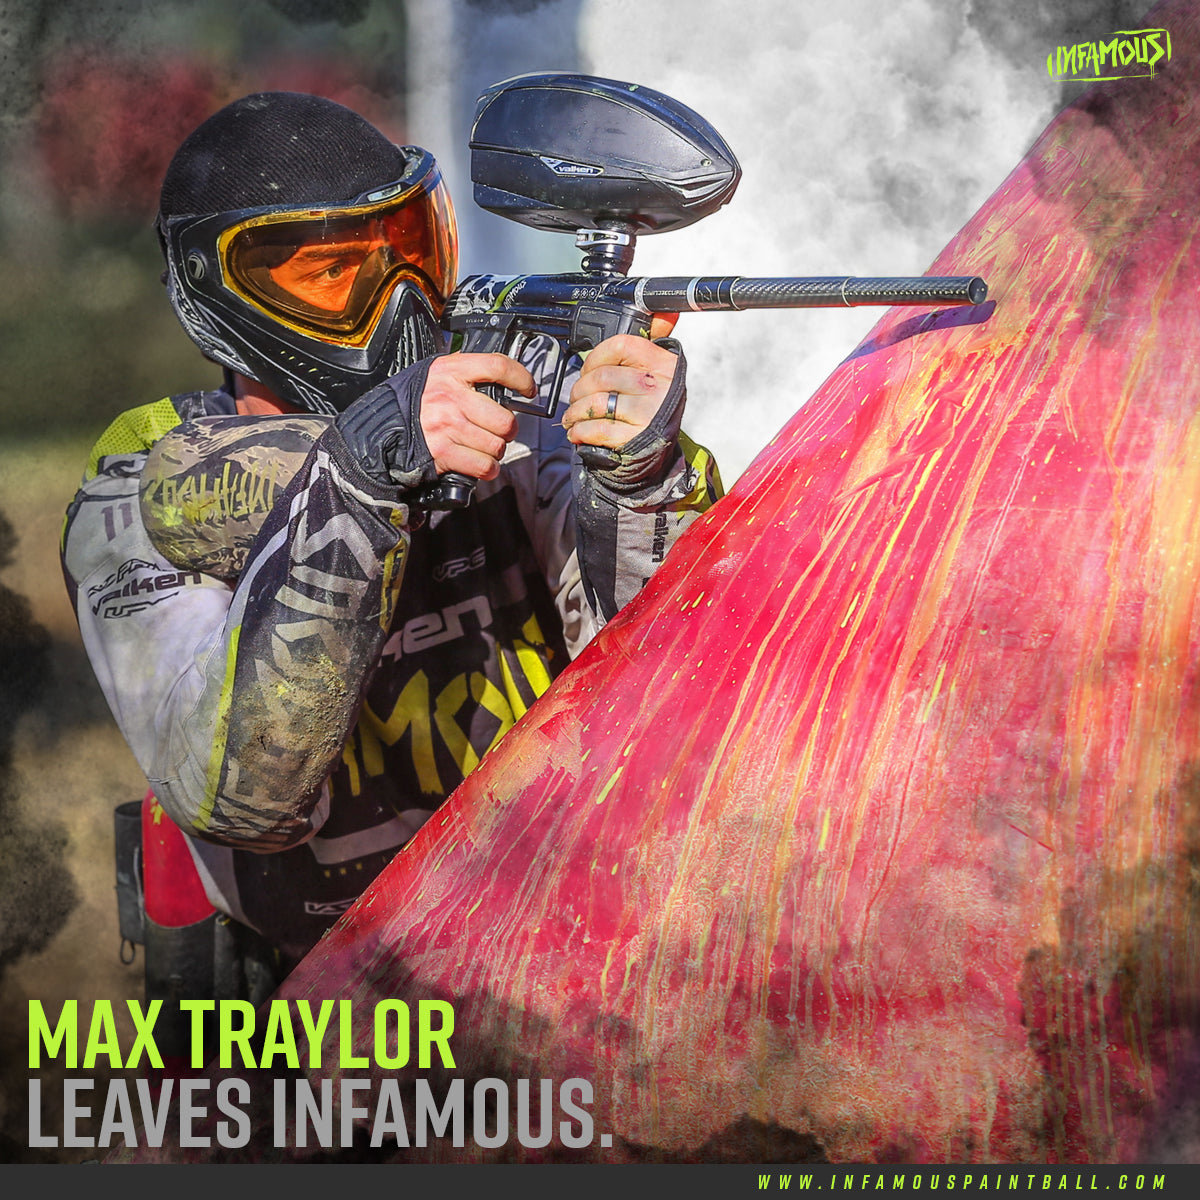 MAX TRAYLOR LEAVES INFAMOUS